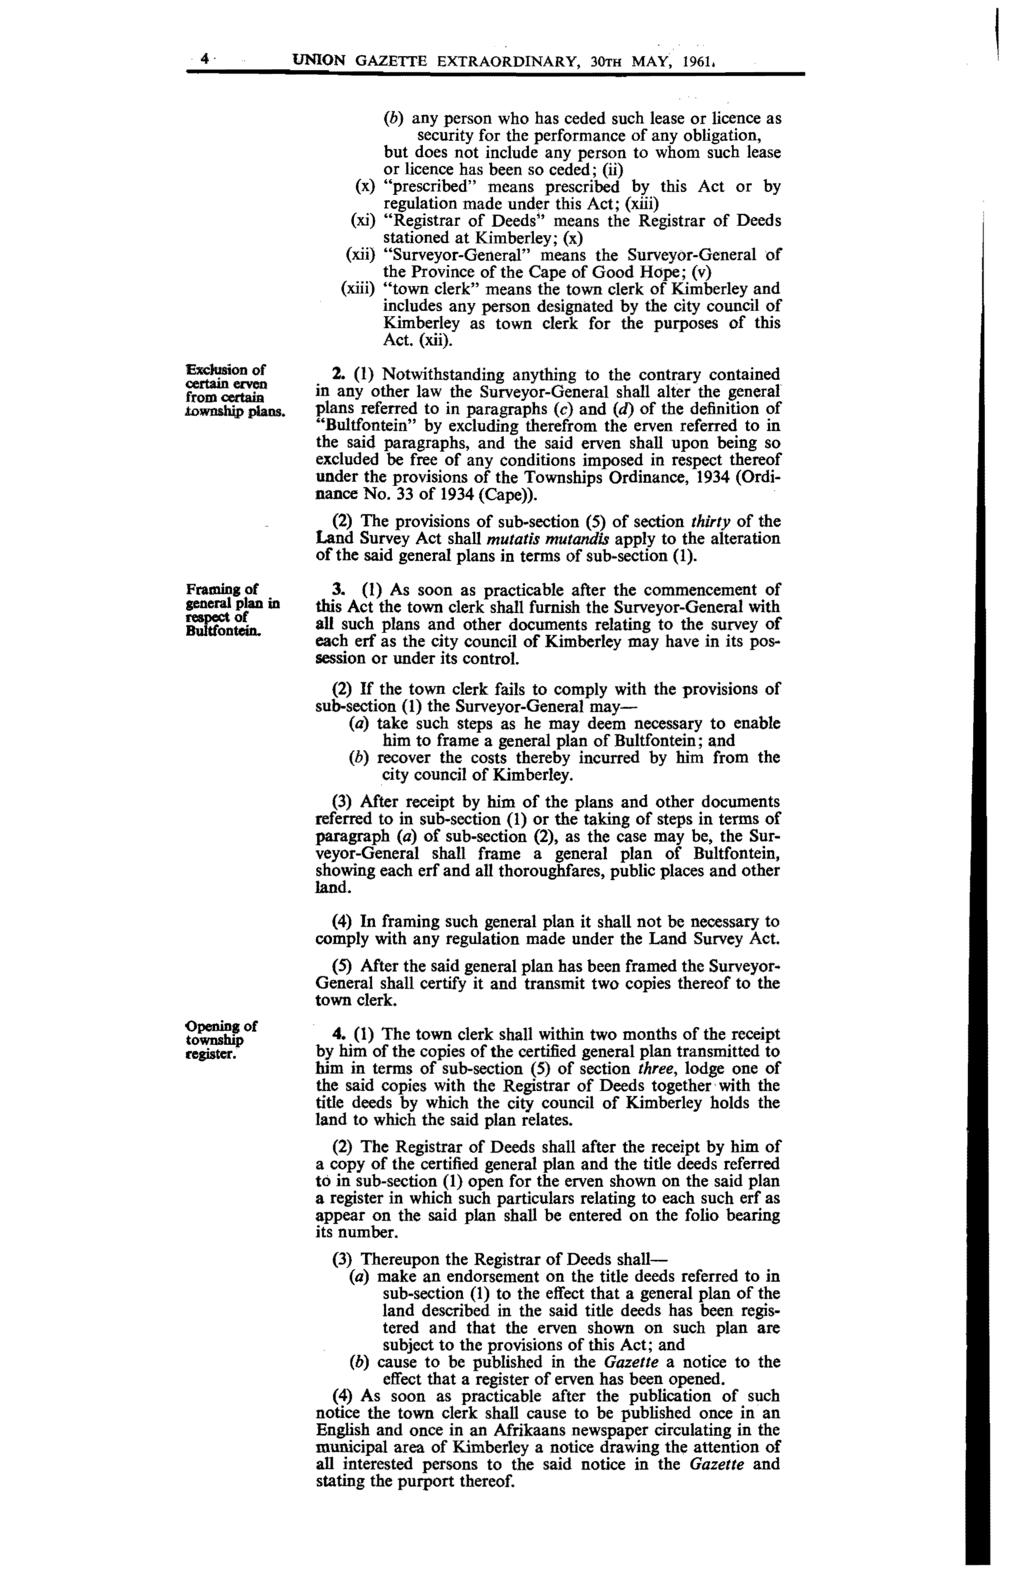 4 UNION GAZETTE EXTRAORDINARY, 30TH MAY, 1961. '&elusion of certainemm from certain townsb.i,p plans. Framing of seneral plan in reapect of Bultfontein. Opening of township register.